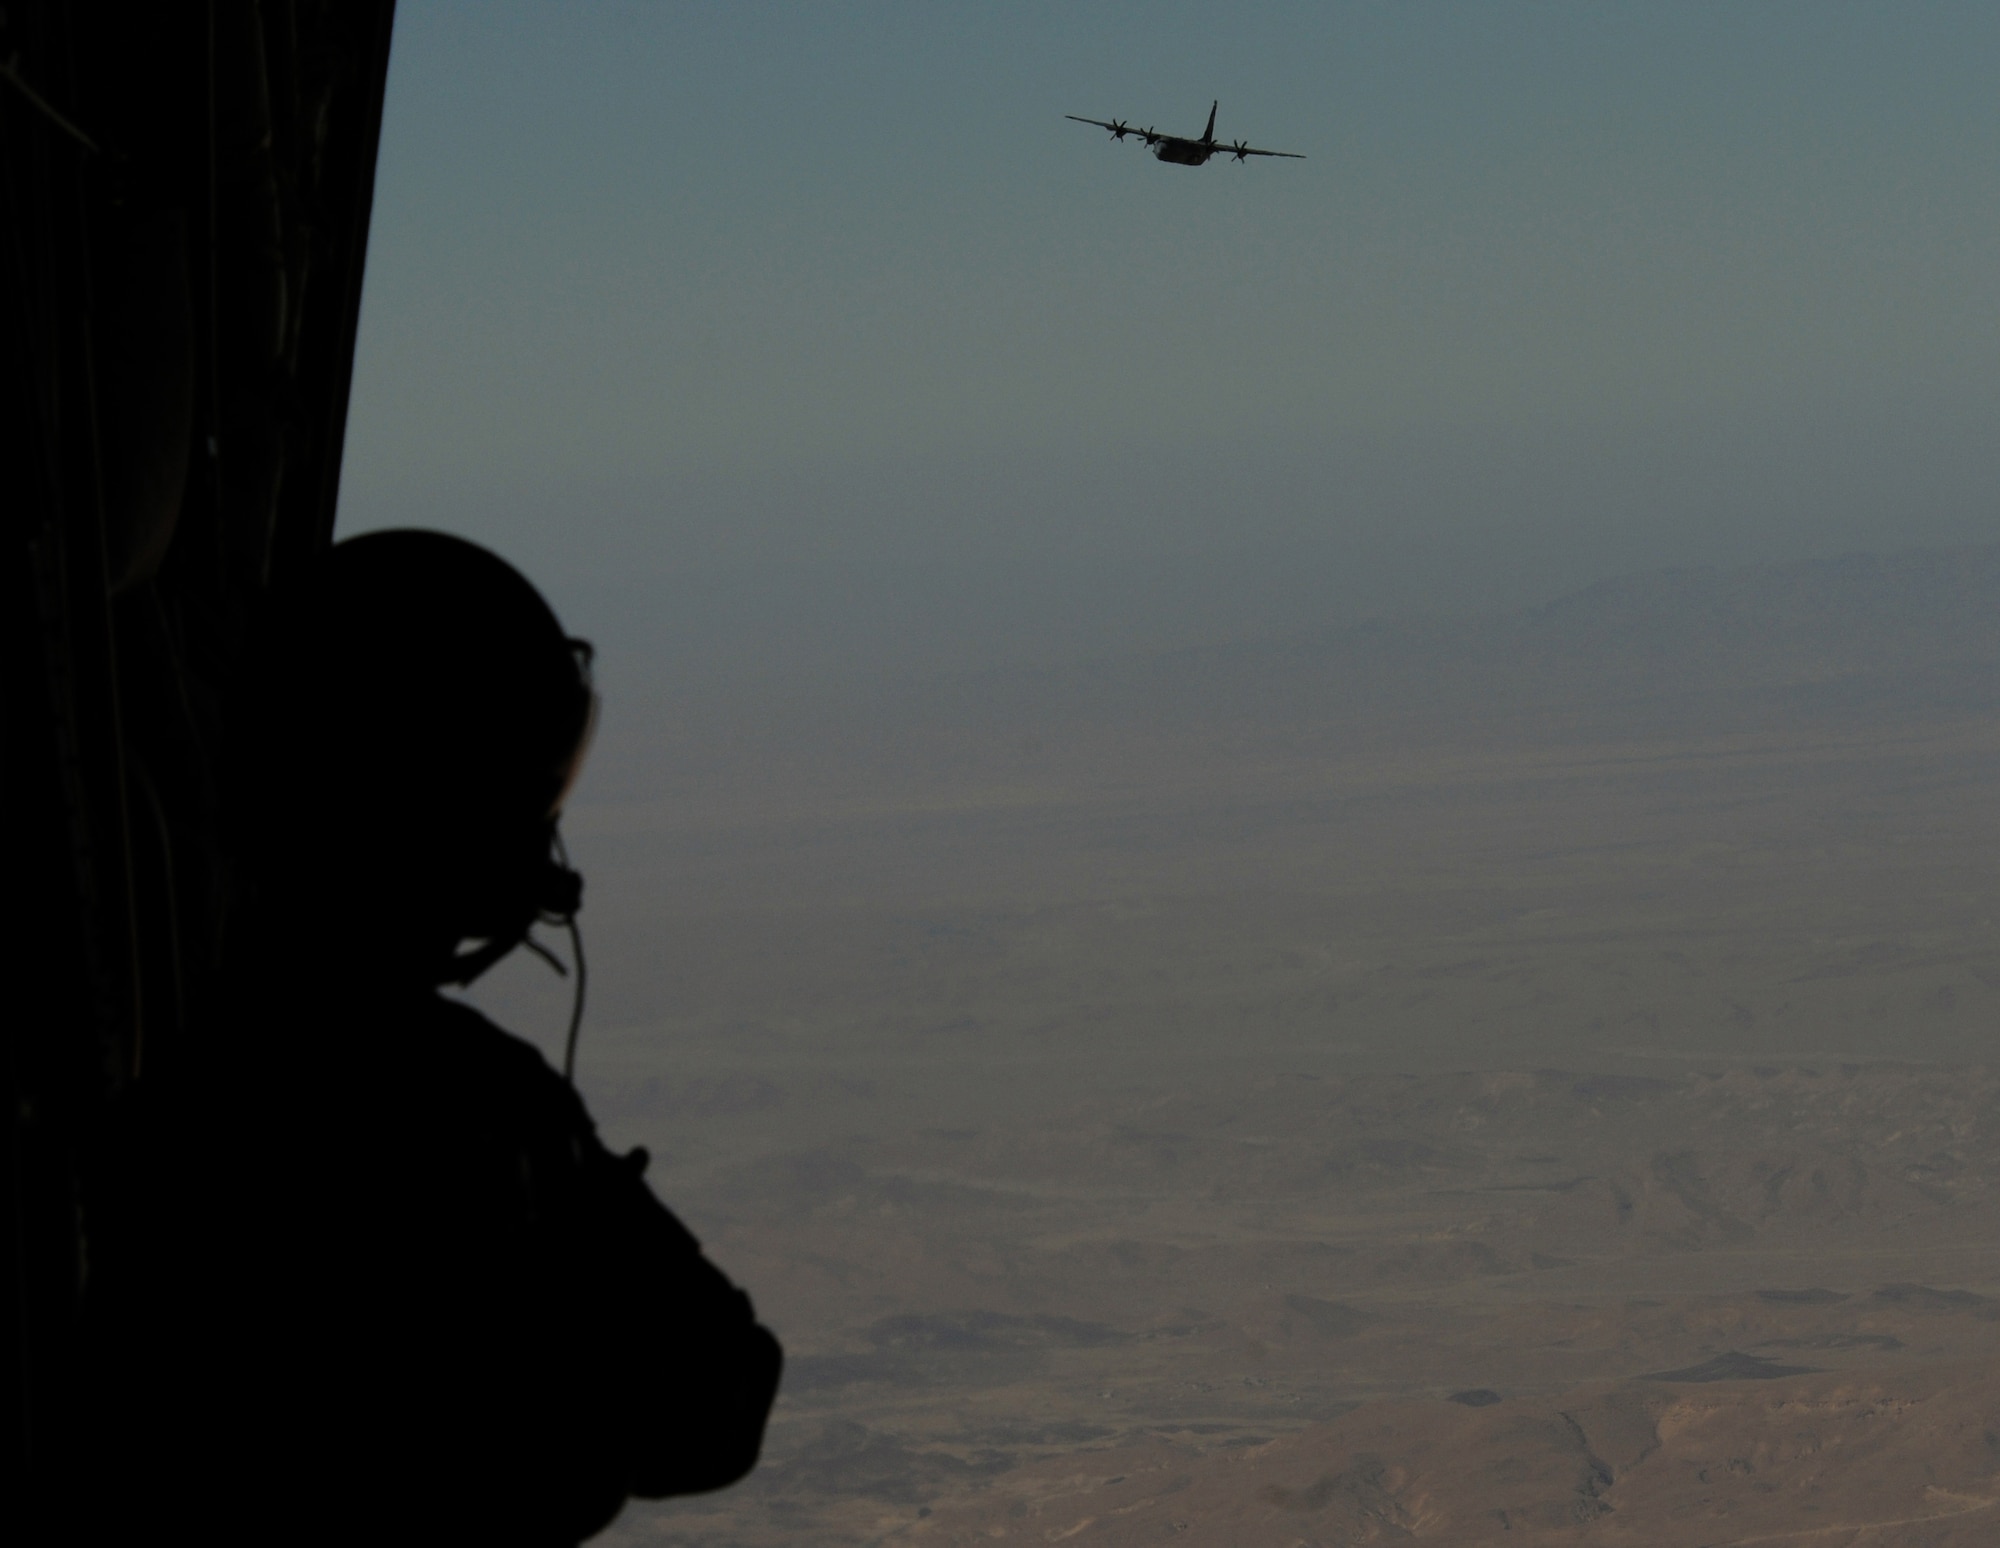 U.S. Air Force Airman 1st Class Craig Morrison, 37th Airlift Squadron loadmaster, watches as a Ramstein C-130J Super Hercules flies in formation, Dec. 6, 2009, over the Negev desert, Israel. Ramstein units participated in a 10-day training exercise to accomplish training requirements because of the strict air restrictions in Germany. (U.S. Air Force photo by Airman 1st Class Alexandria Mosness) 